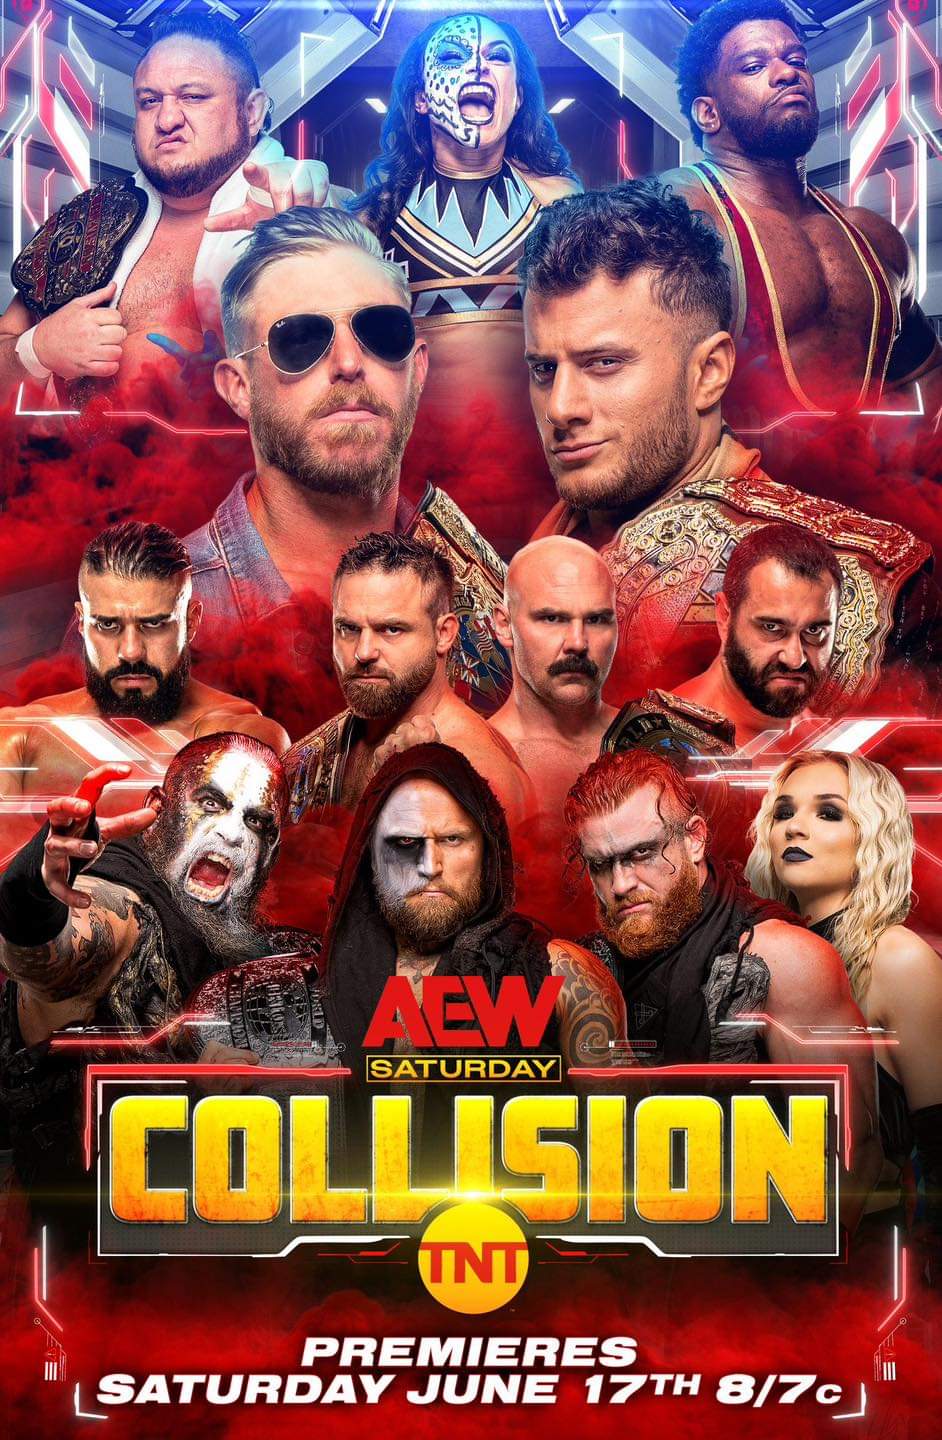 Covalent TV on Twitter: "BREAKING NEWS: AEW Collision announced! Full Press Release below! TNT LAUNCHES A SECOND NIGHT OF WRESTLING WITH “AEW: COLLISION” FEATURING HEADLINERS THUNDER ROSA, MIRO, SAMOA JOE, POWERHOUSE HOBBS